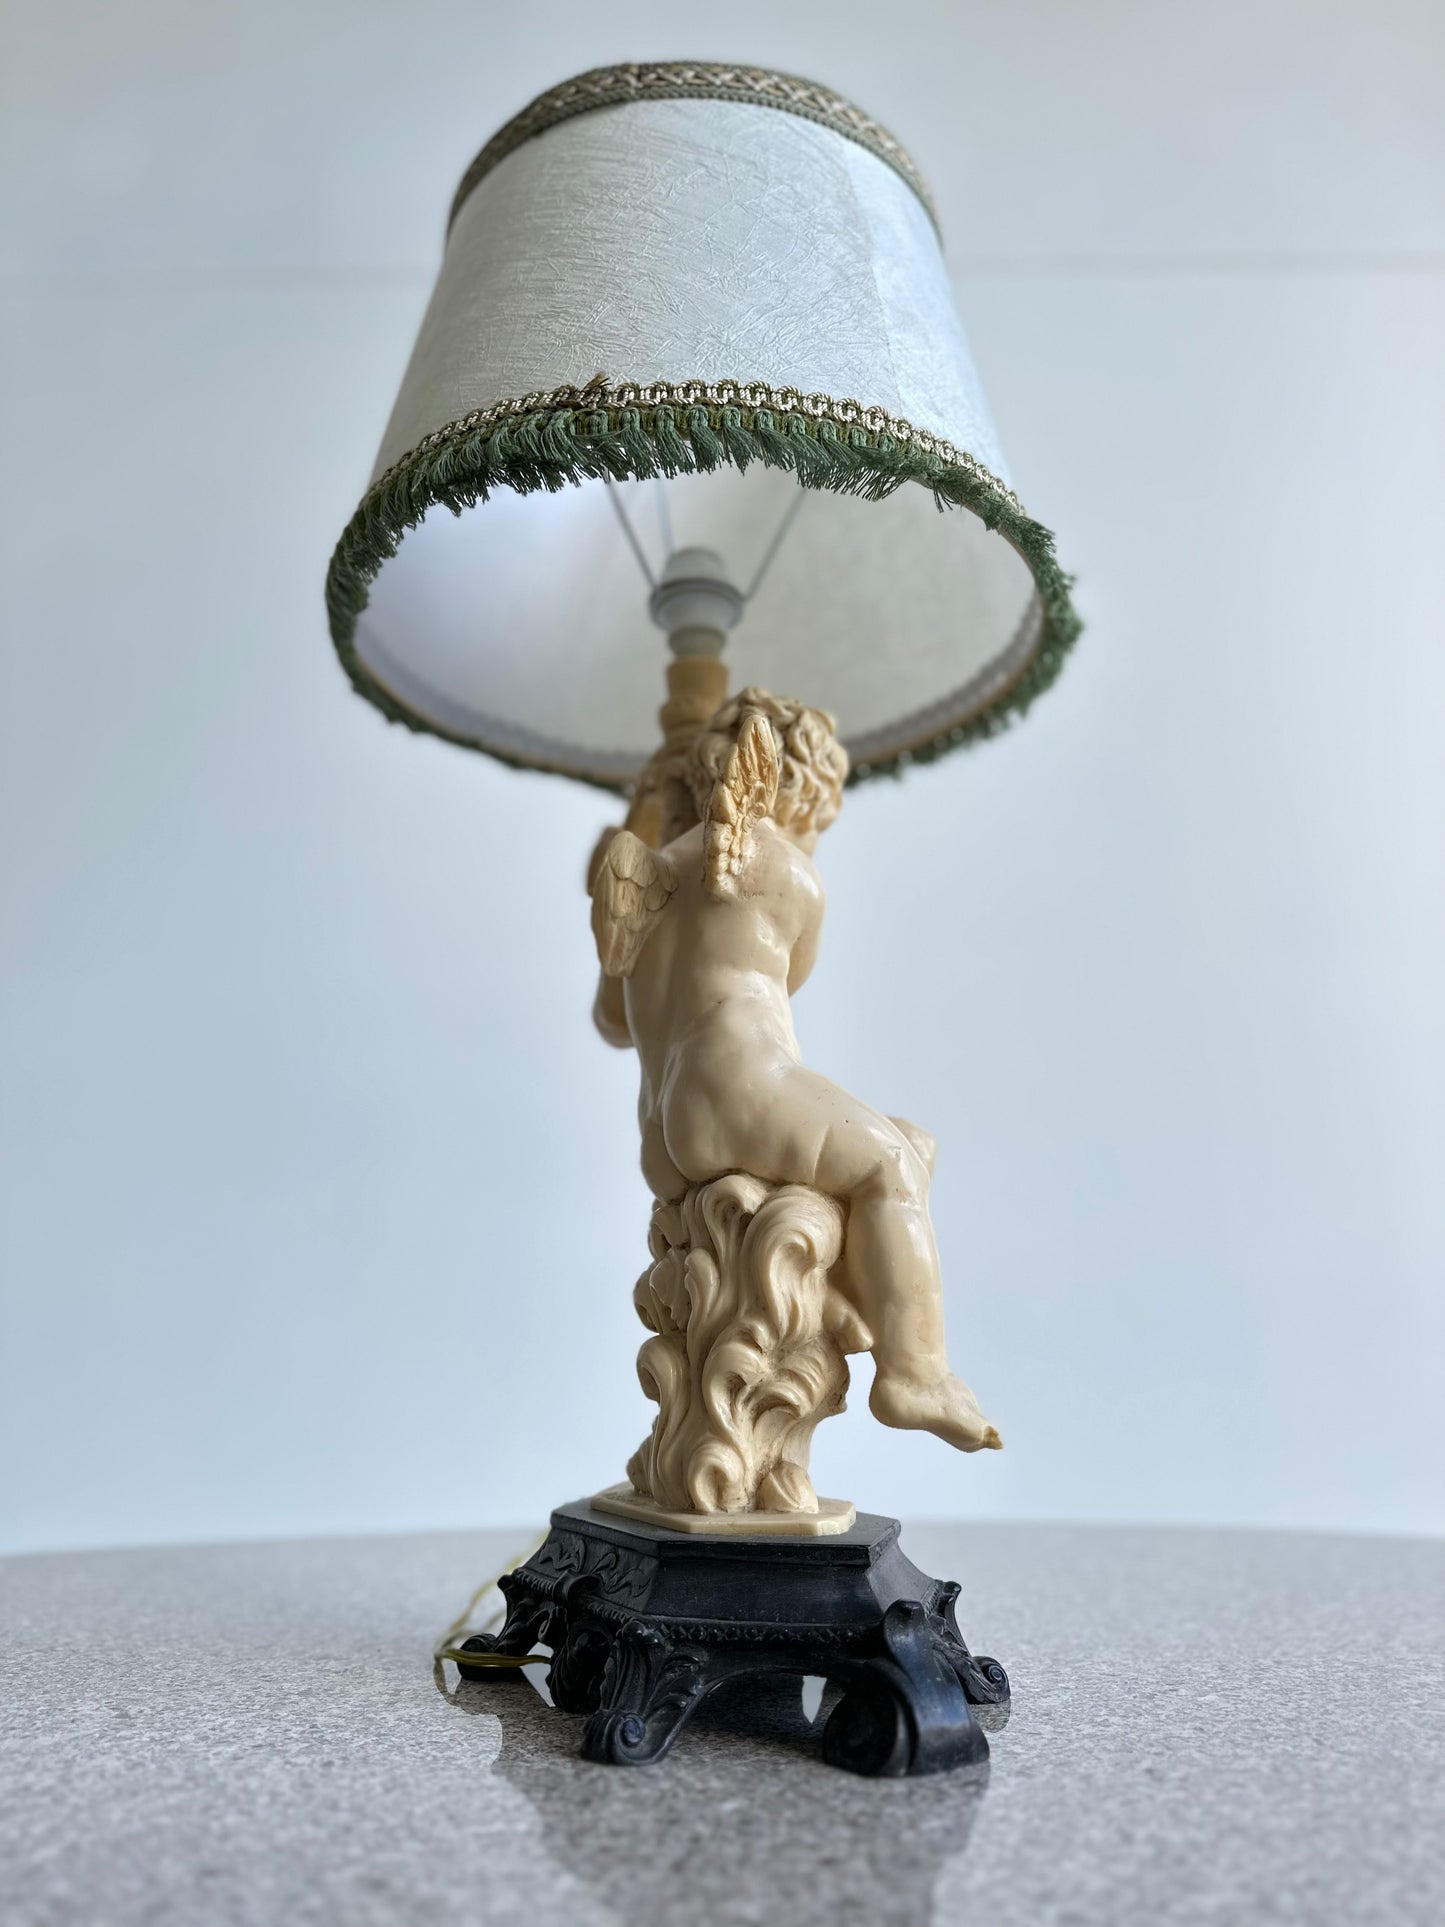 Sculpture Resin Table Lamp by Santini Tuscany, 1970s